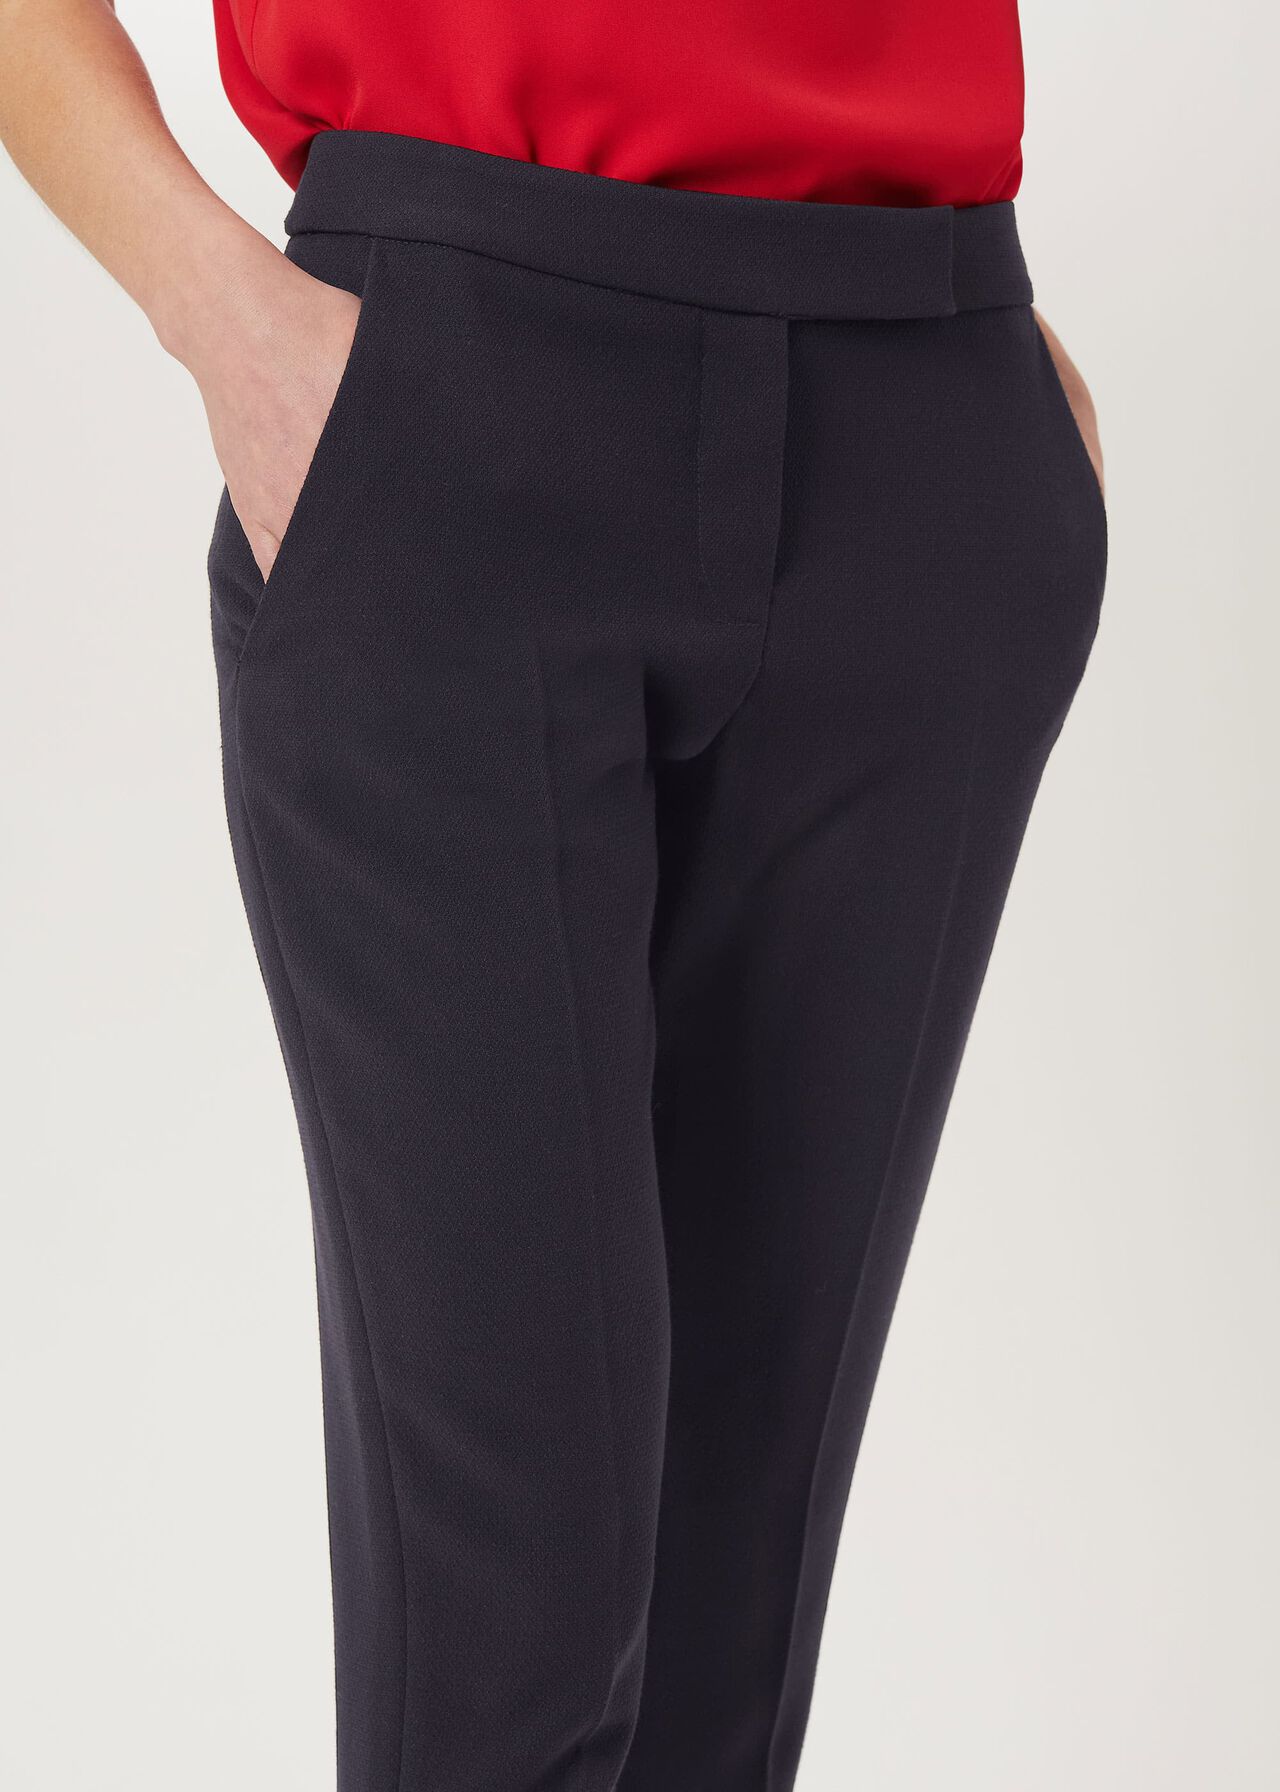 Leila Slim Trousers With Stretch, Navy, hi-res